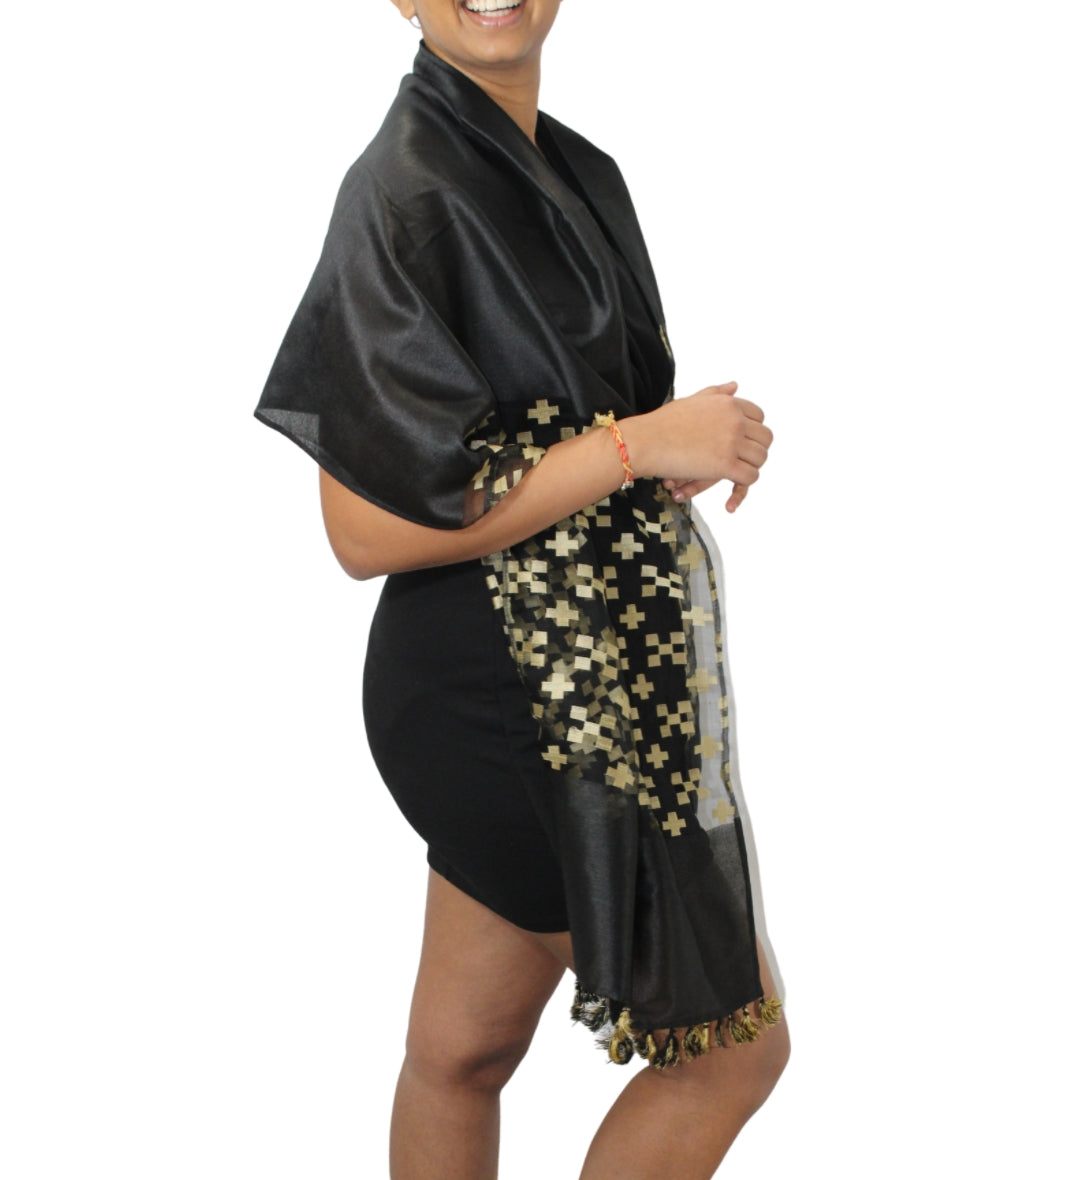 The Upcycled Luxurious Silk Scarf Patterned - Black and gold crosses